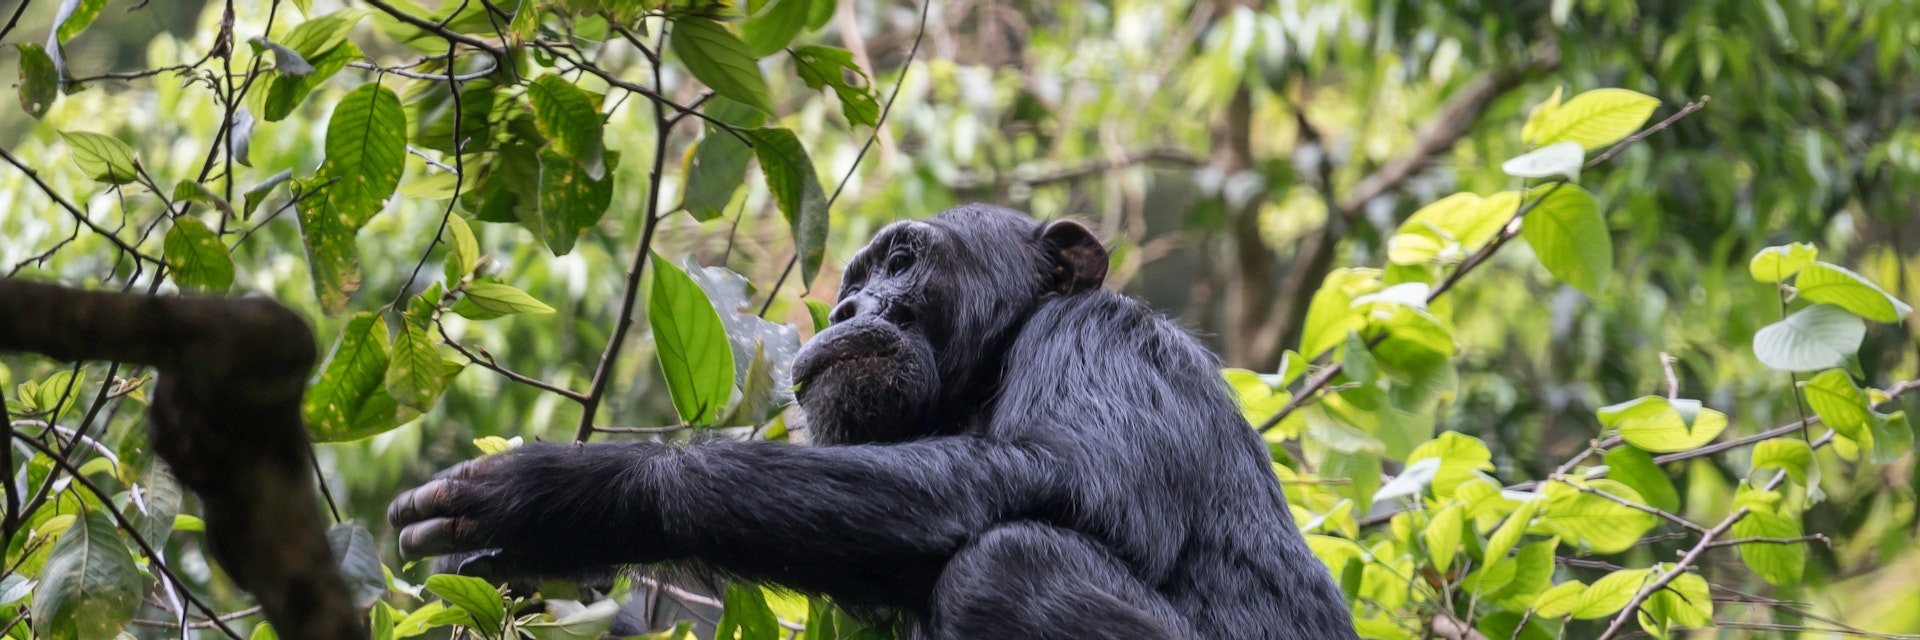 A chimpanzee in the Budongo Forest in the Murchison Falls National Park.